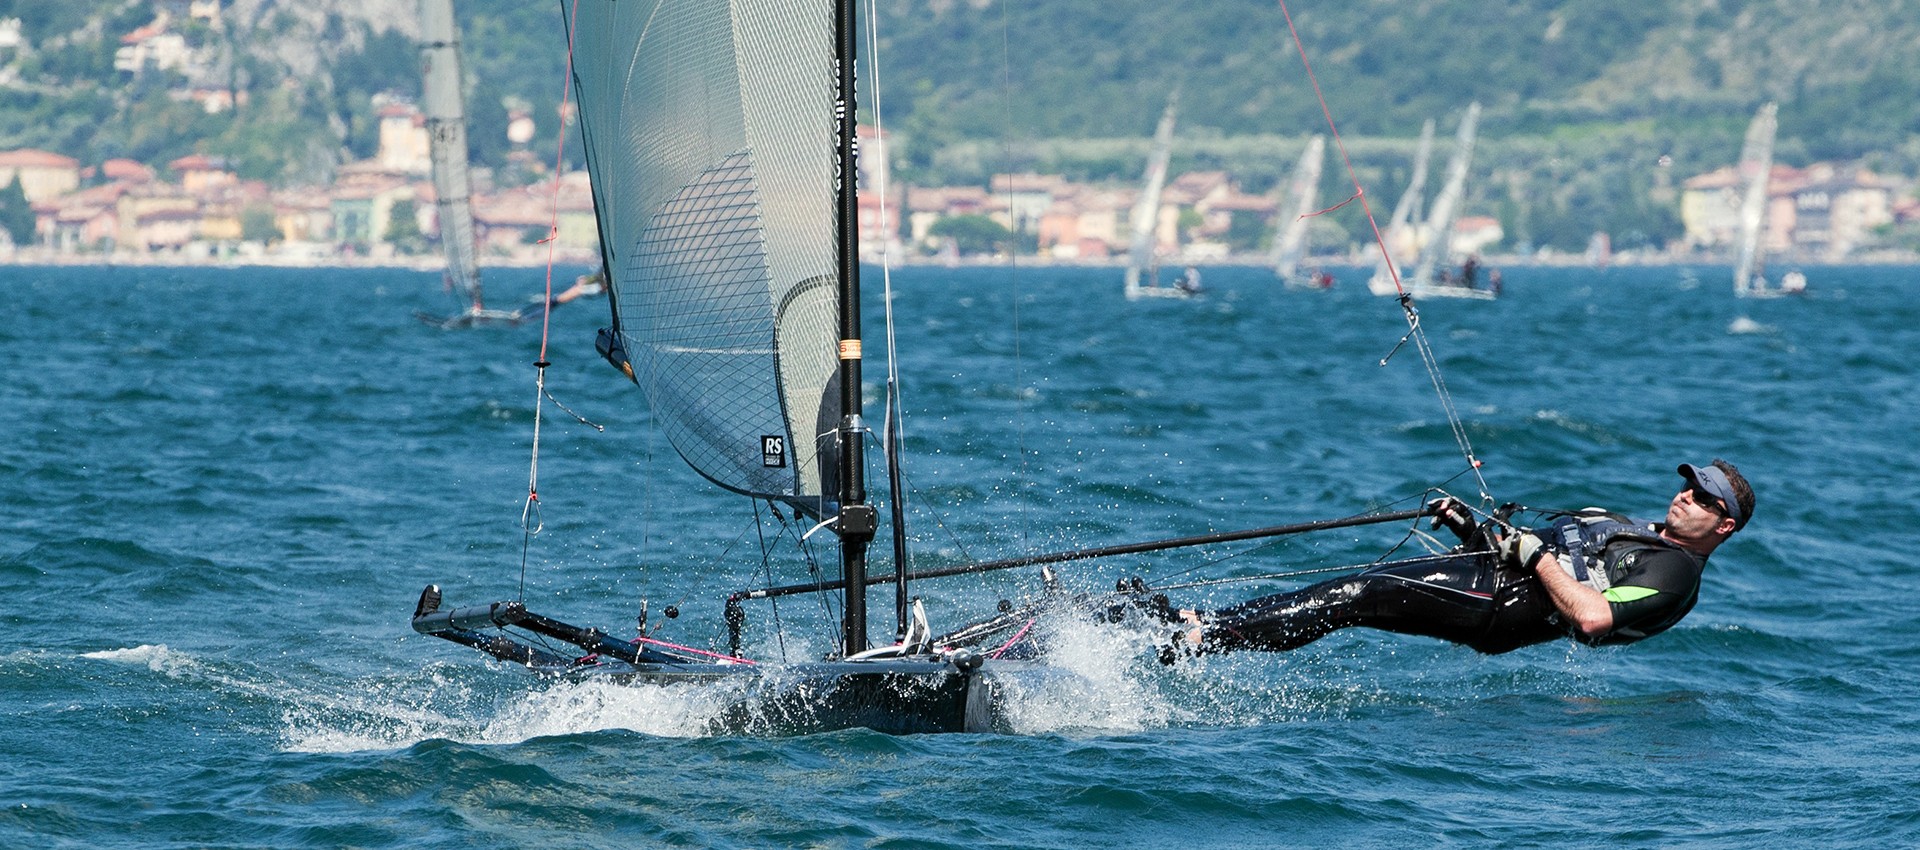 Racing Sailboat, RS700 high performance skiff with trapeze